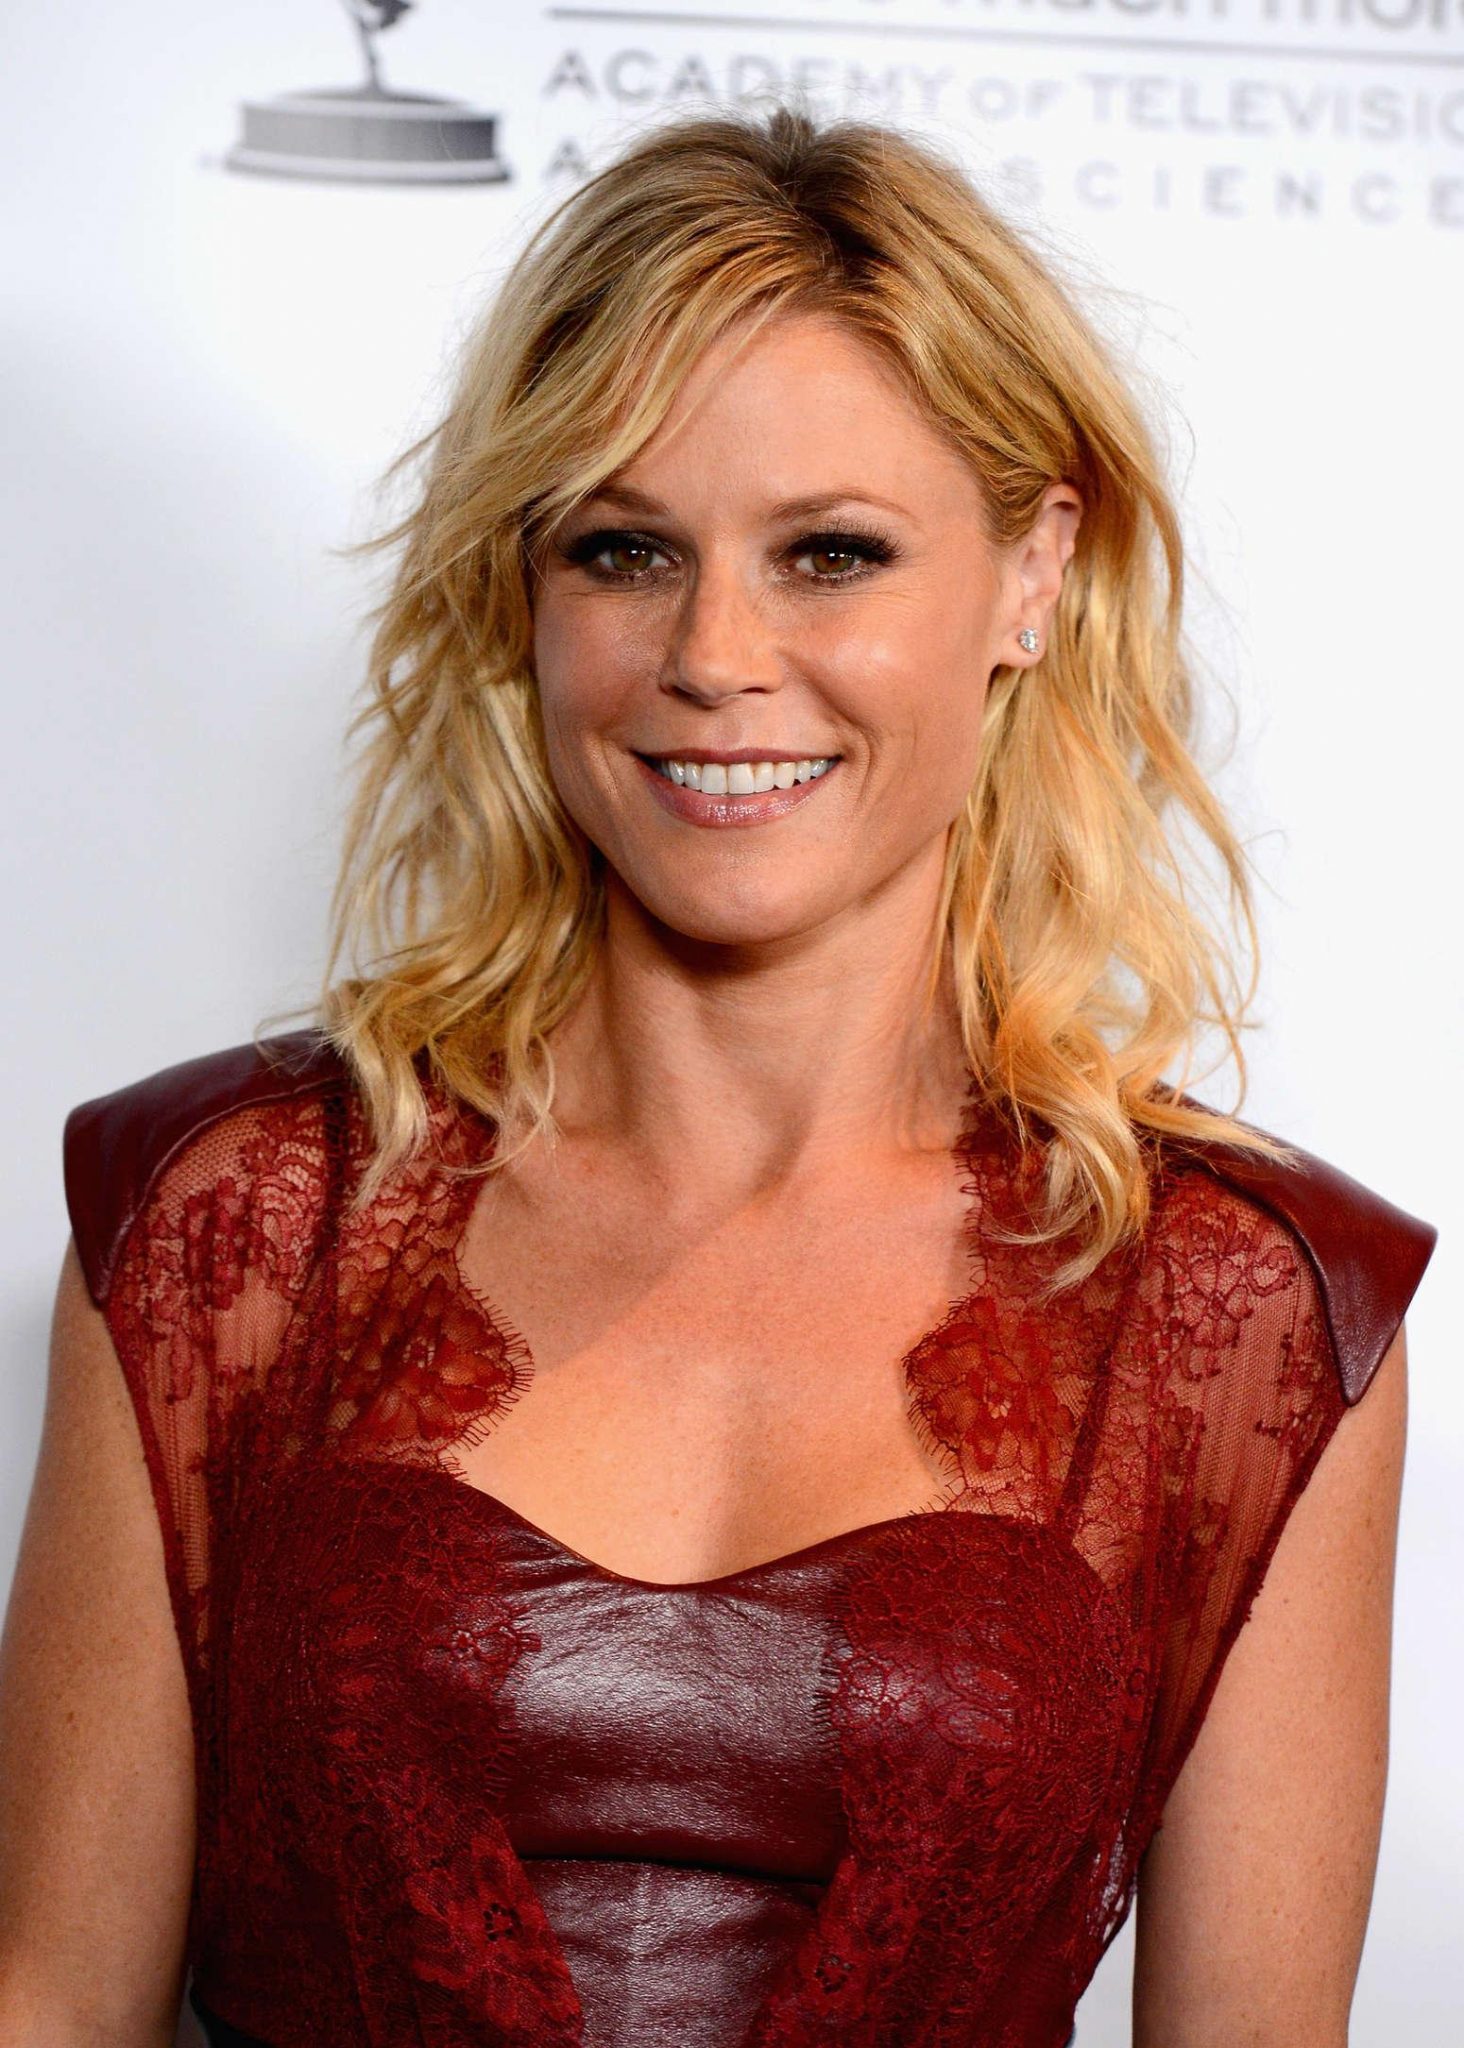 49 Julie Bowen Nude Pictures Are Sure To Keep You At The Edge Of Your Seat 342